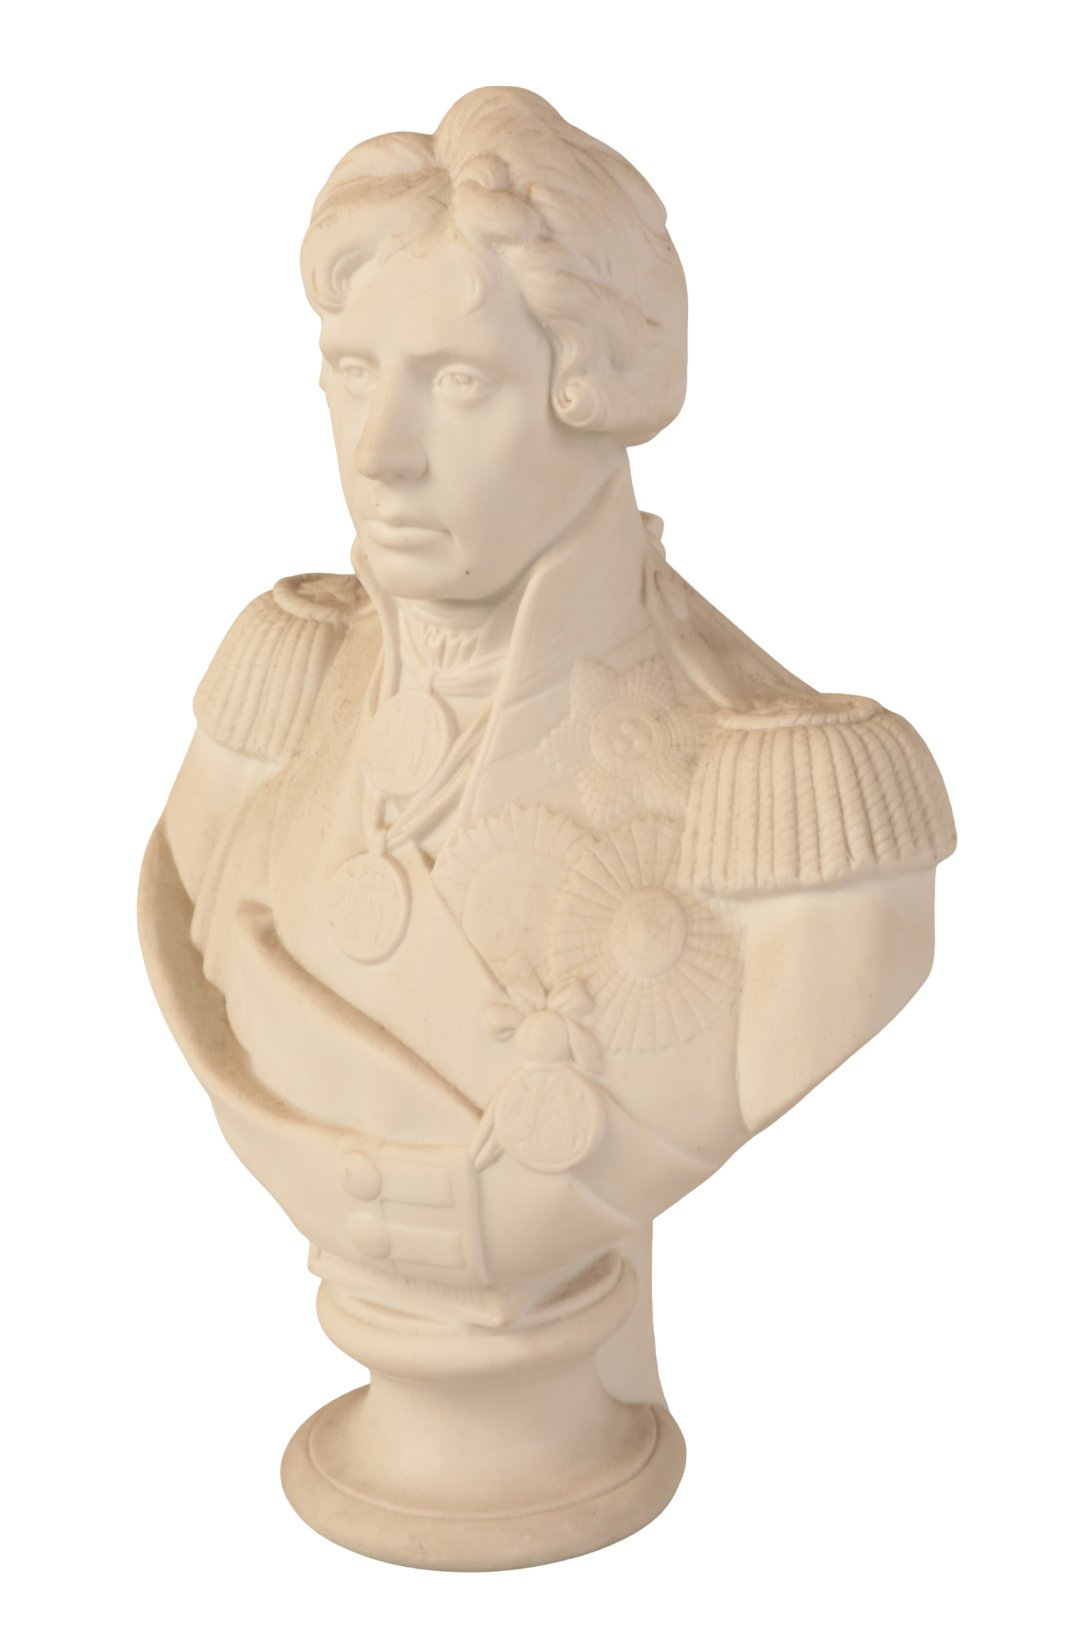 A PARIAN WARE BUST OF ADMIRAL LORD NELSON (1758-1805) - Image 2 of 2